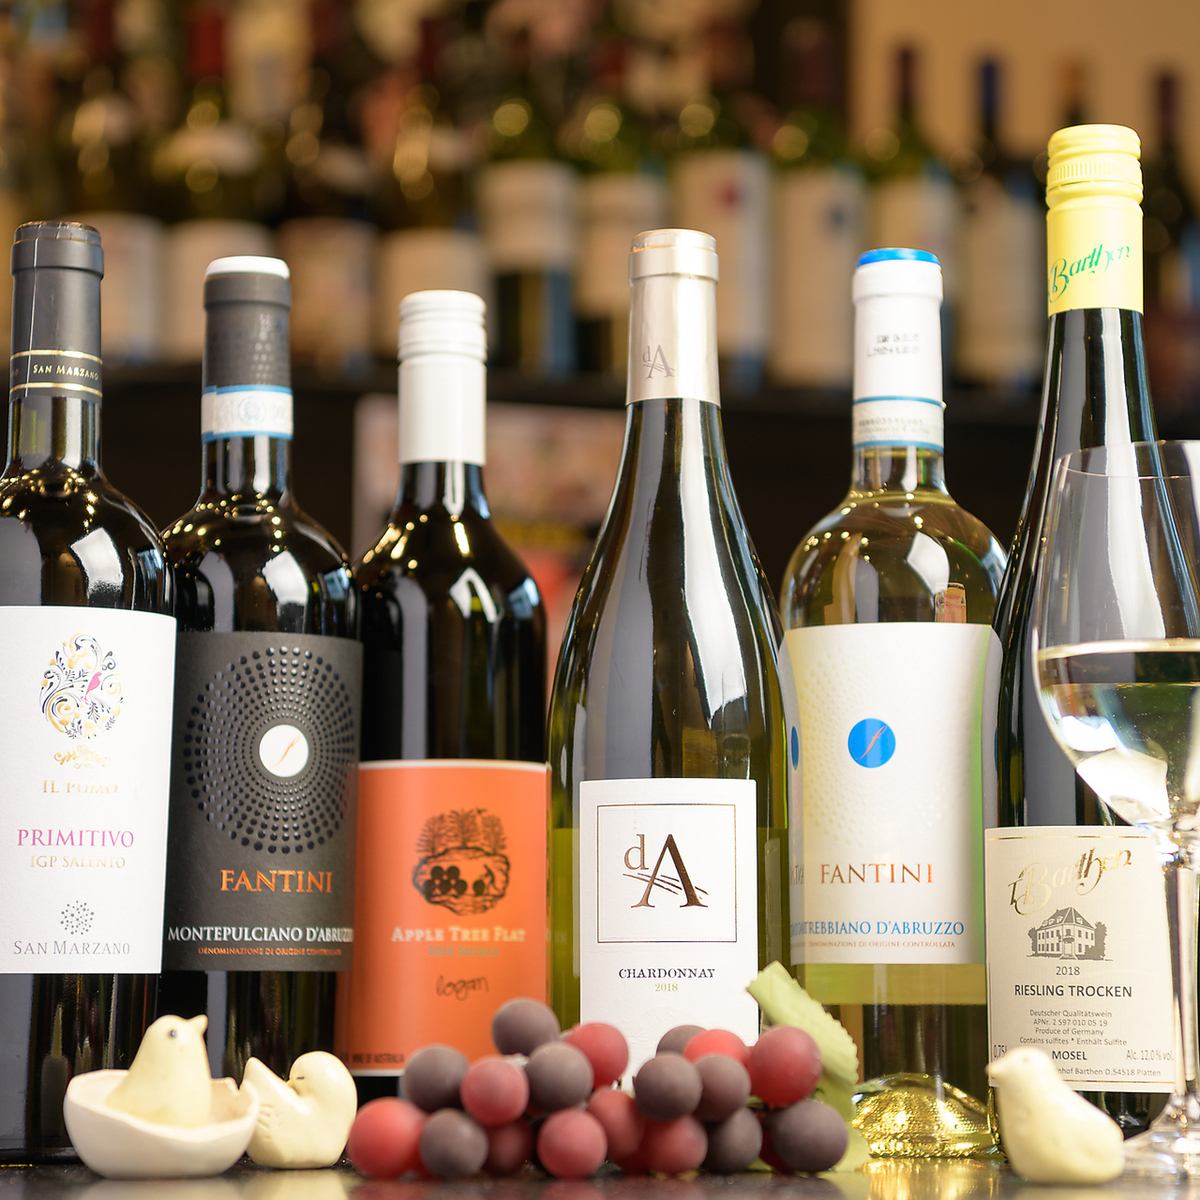 [Many discerning brands] We have more than 50 brands of wine.